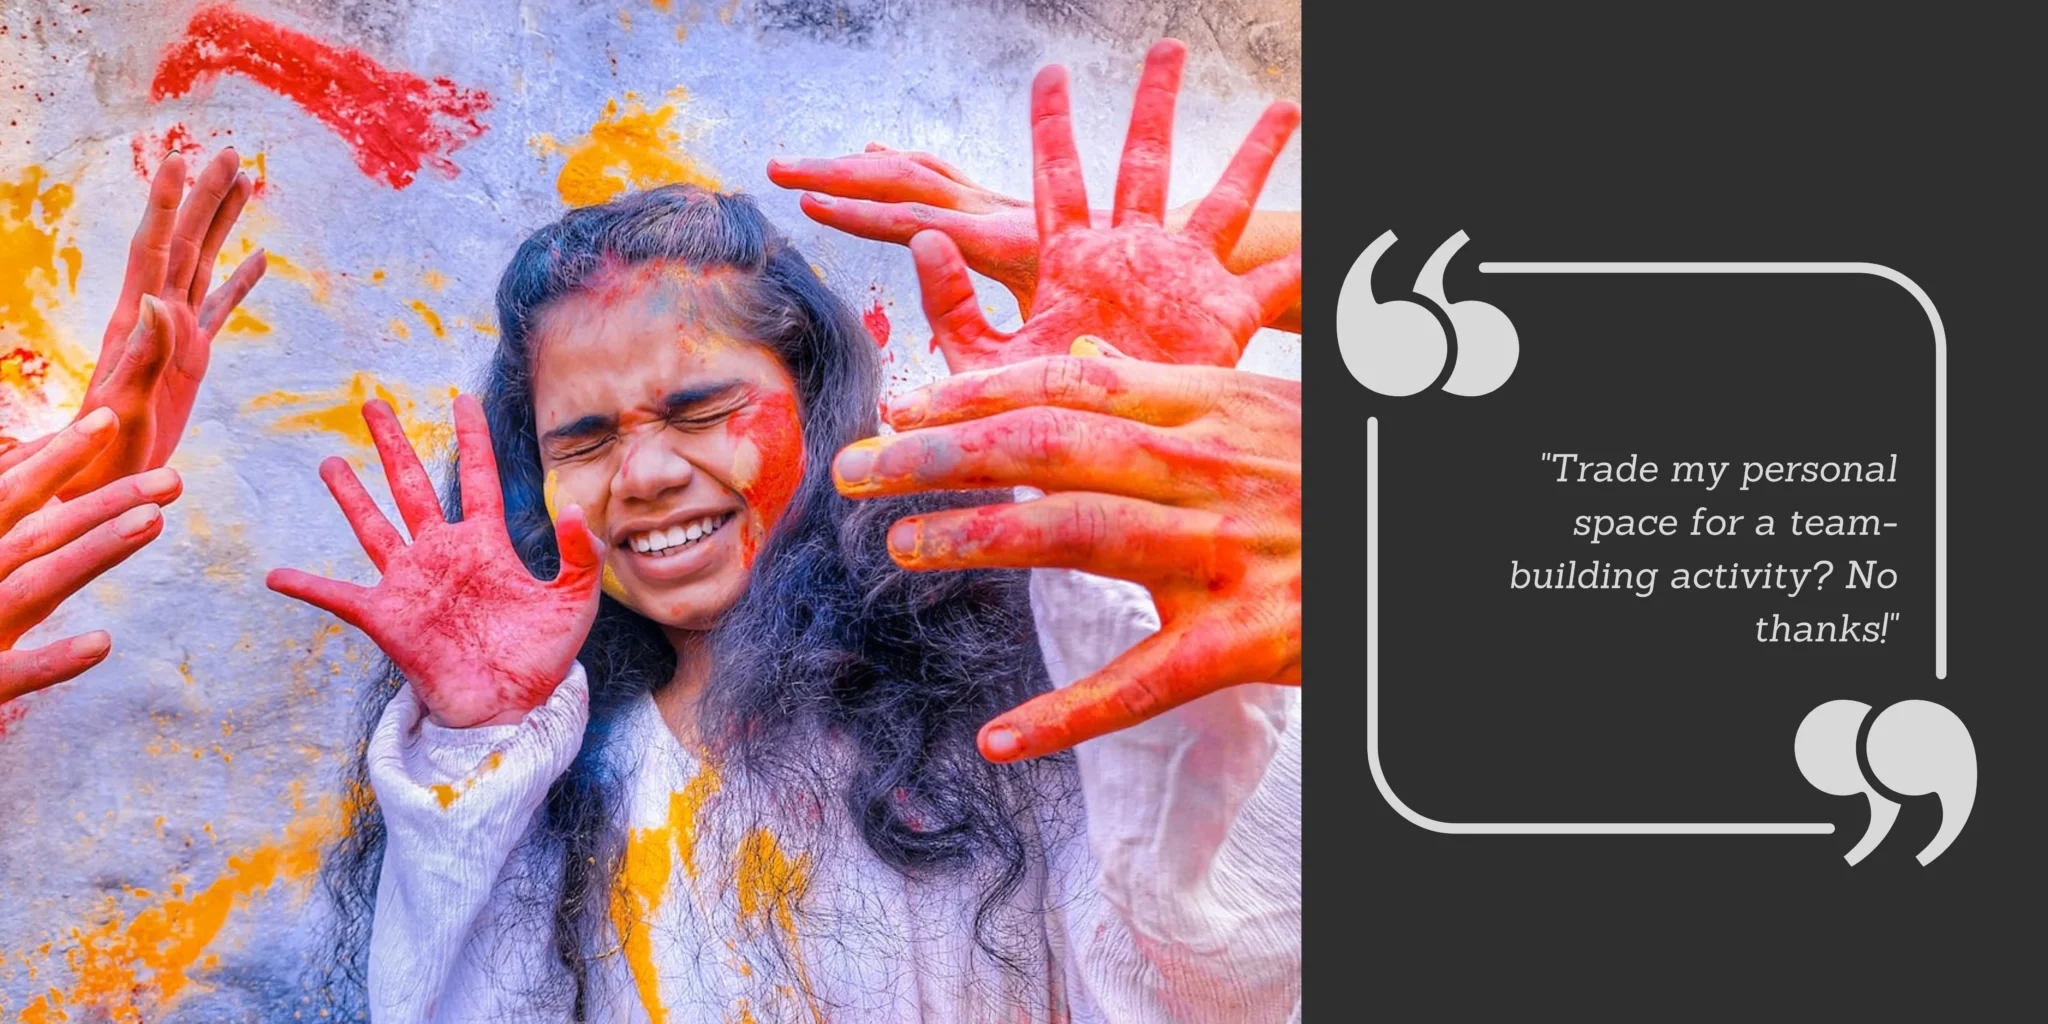 A young girl holding her hands up to her face when colour gets thrown at her